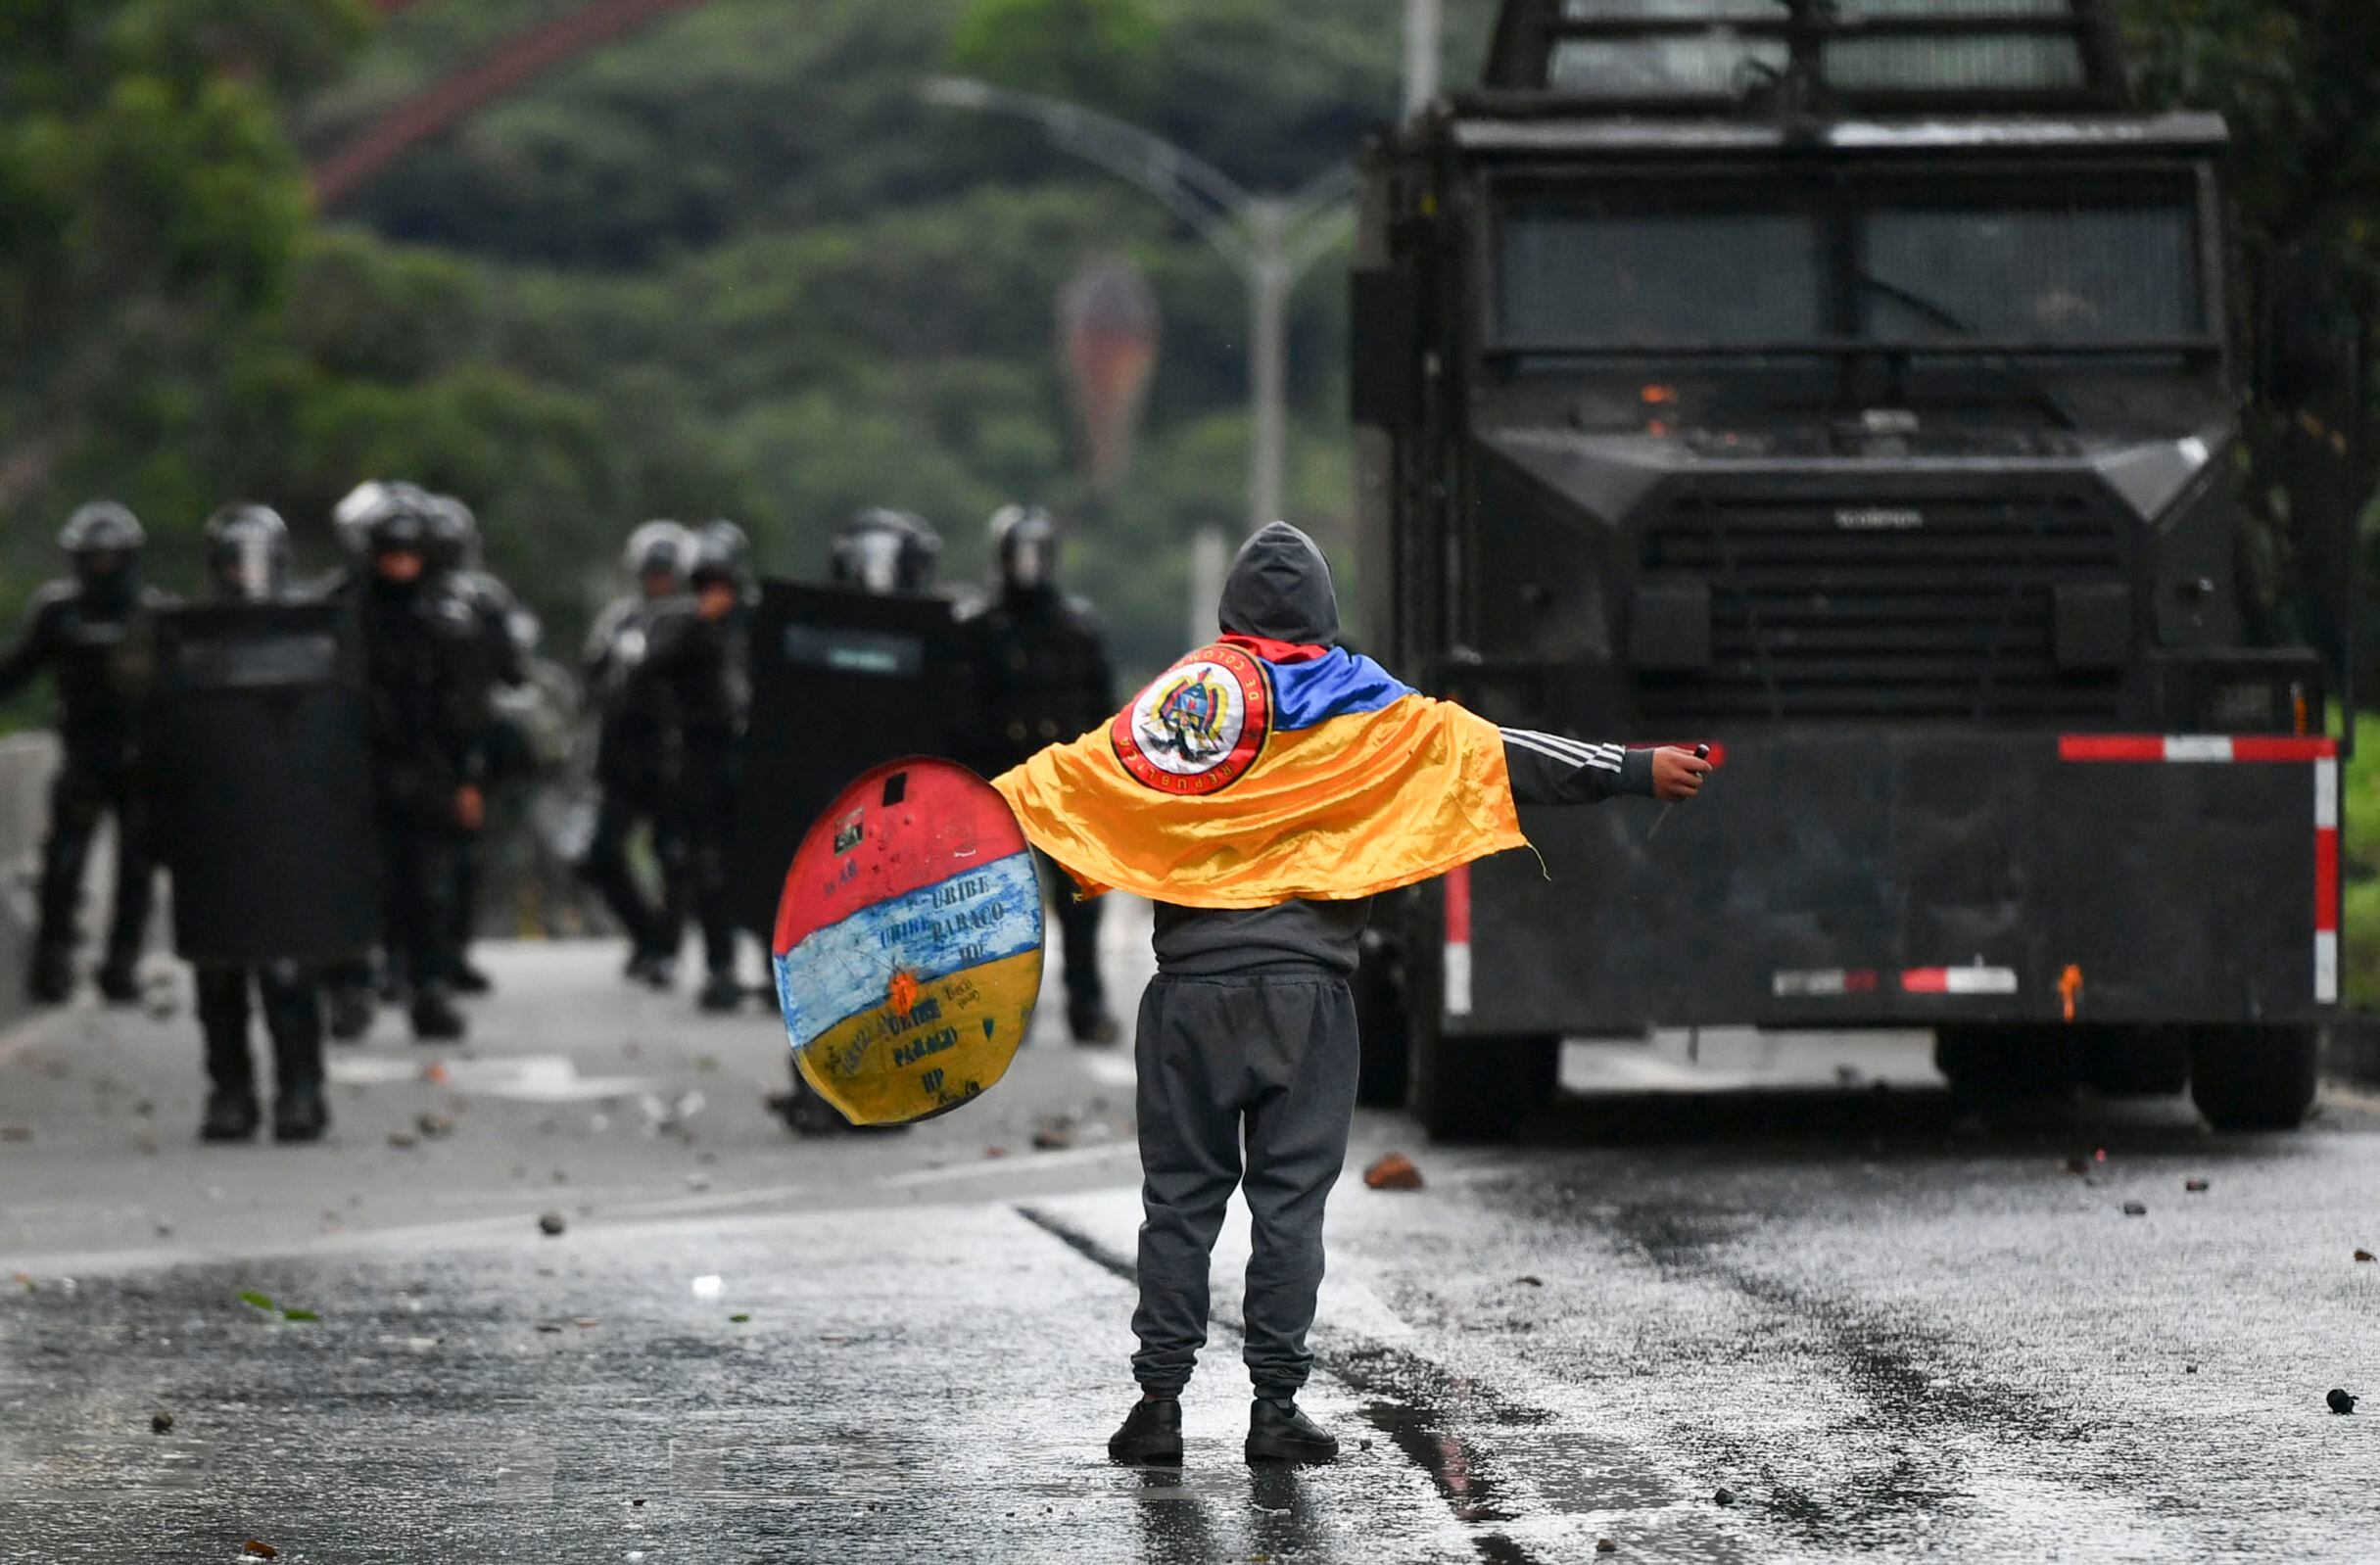 A demonstrator confronts riot police during a protest against the government of Colombian President Iván Duque to commemorate the first anniversary of a social outbreak, in Medellin, Colombia, on April 28, 2022.